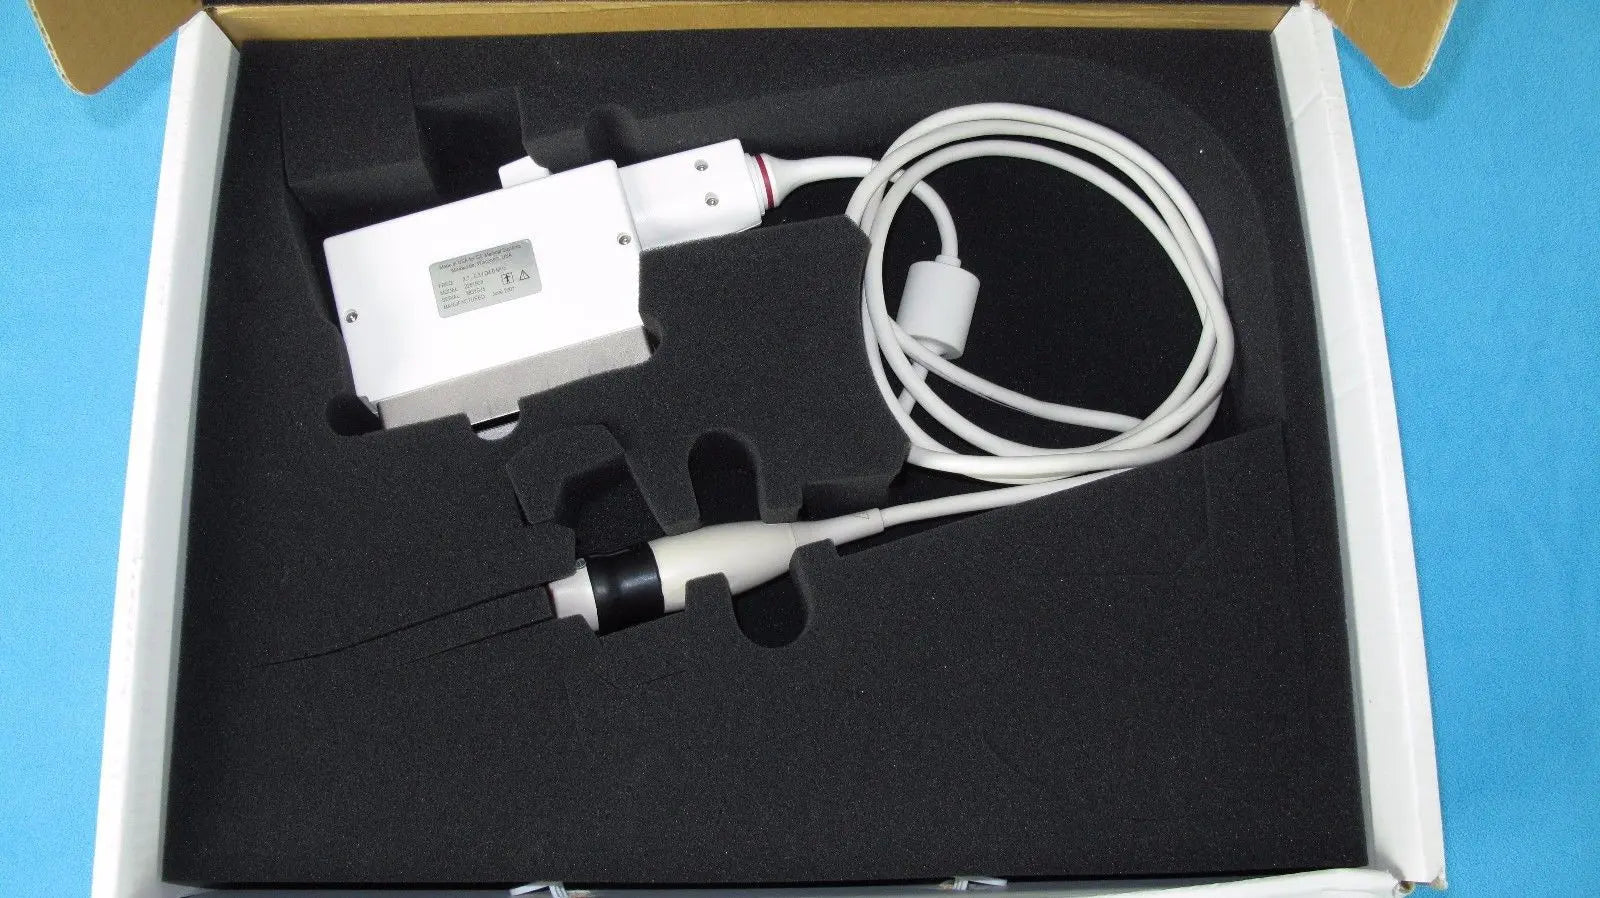 GE 7S Model 2251903 Ultrasound Transducer (Probe) 4 MHz With Case (Excellent) DIAGNOSTIC ULTRASOUND MACHINES FOR SALE